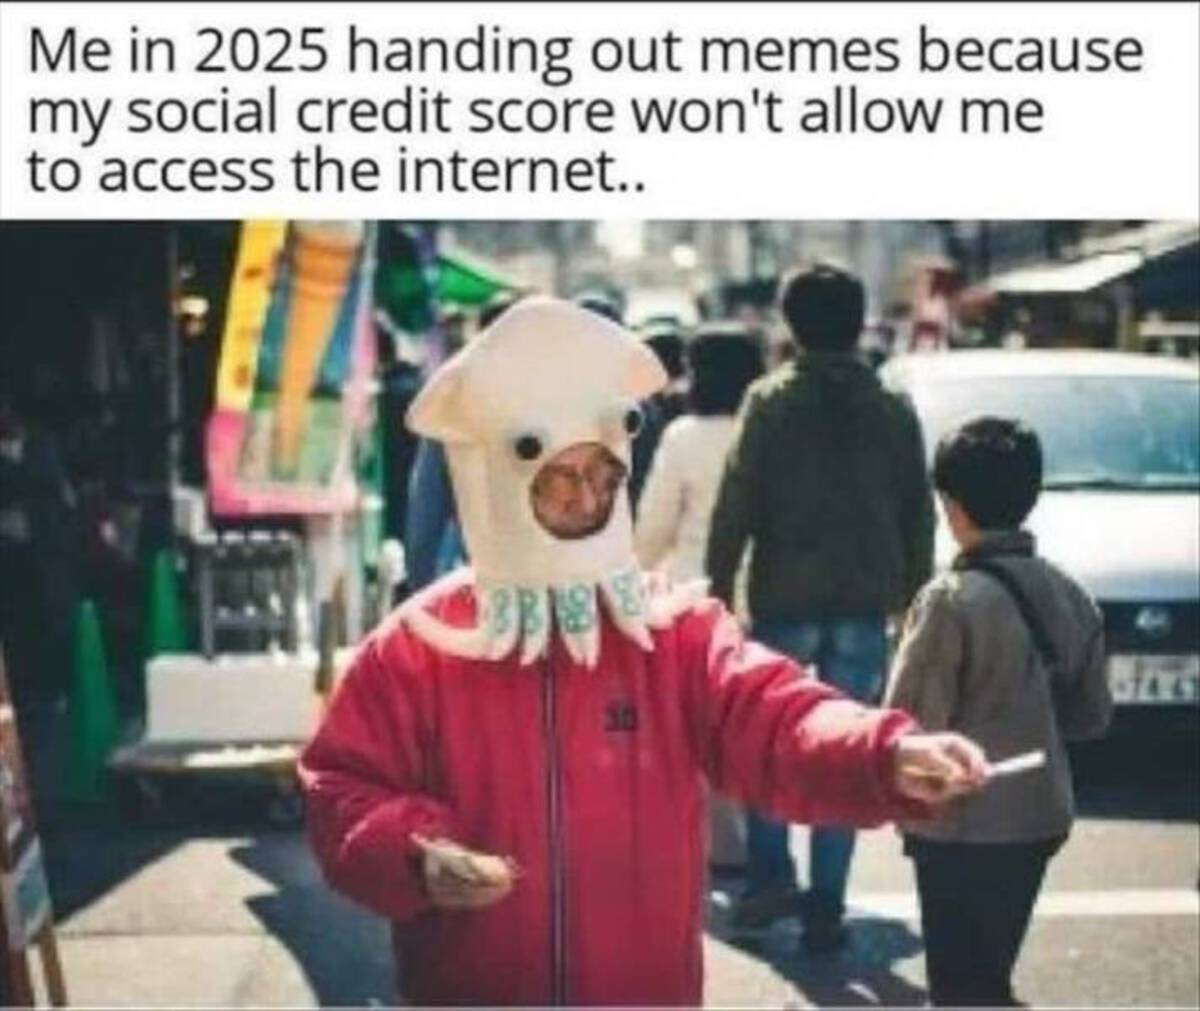 social credit score memes - Me in 2025 handing out memes because my social credit score won't allow me to access the internet..